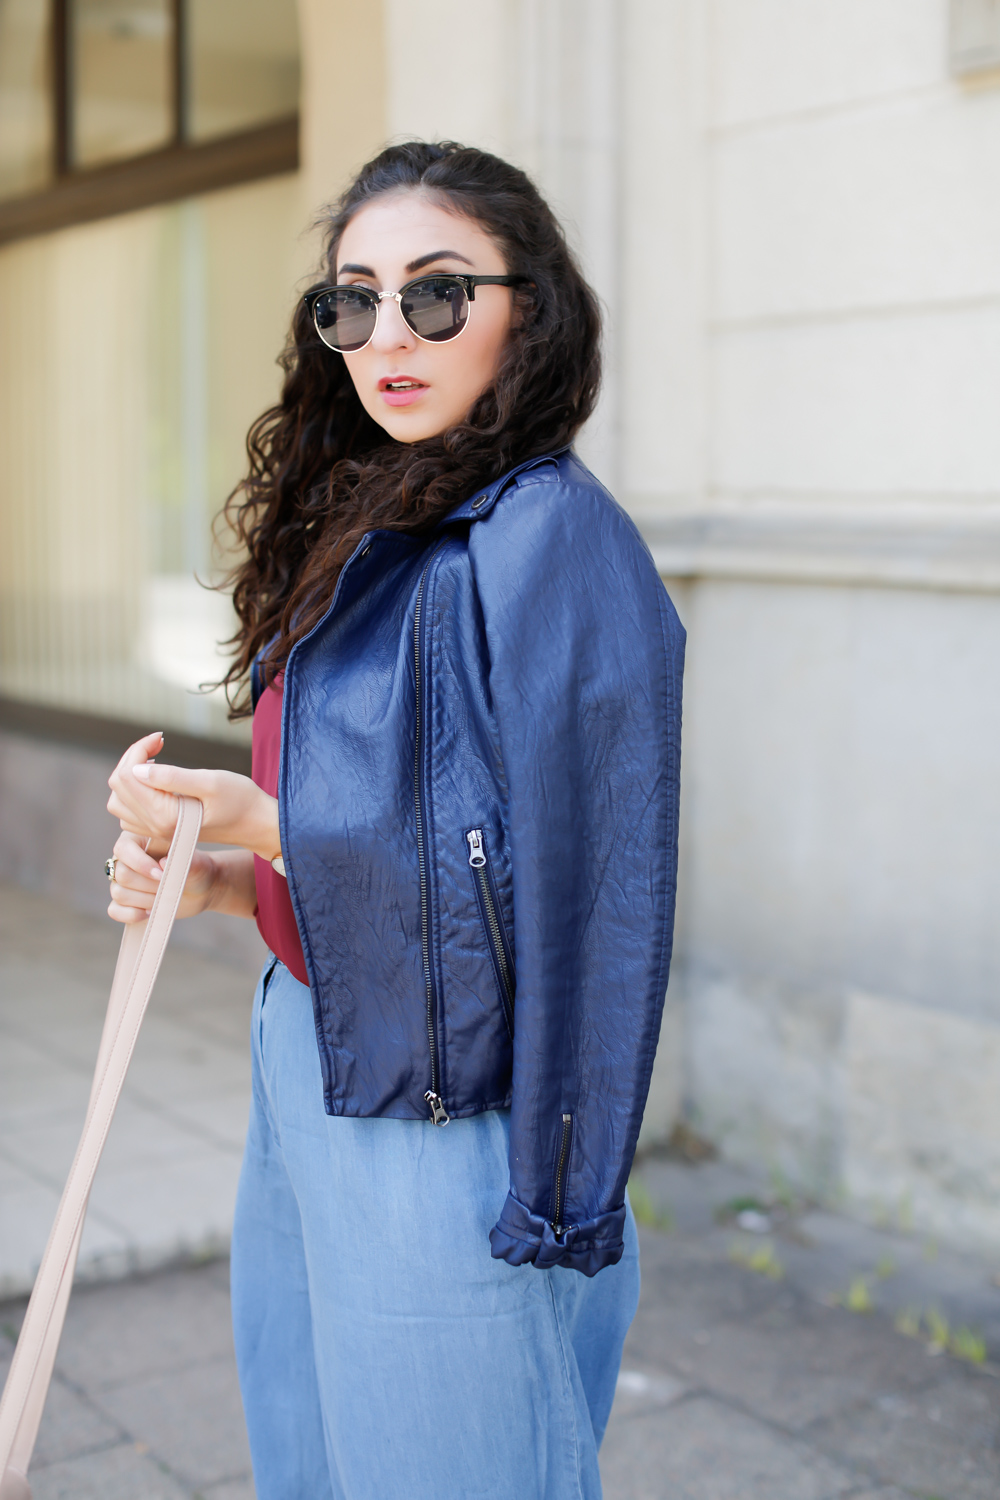 Mango Denim Culottes Butterfly Twist pointed ballerinas ballet shoes Strappy Top Topshop Leather Jacket Hosenrock Jeans Summer Style Spring Berlin Streetstyle Samieze 